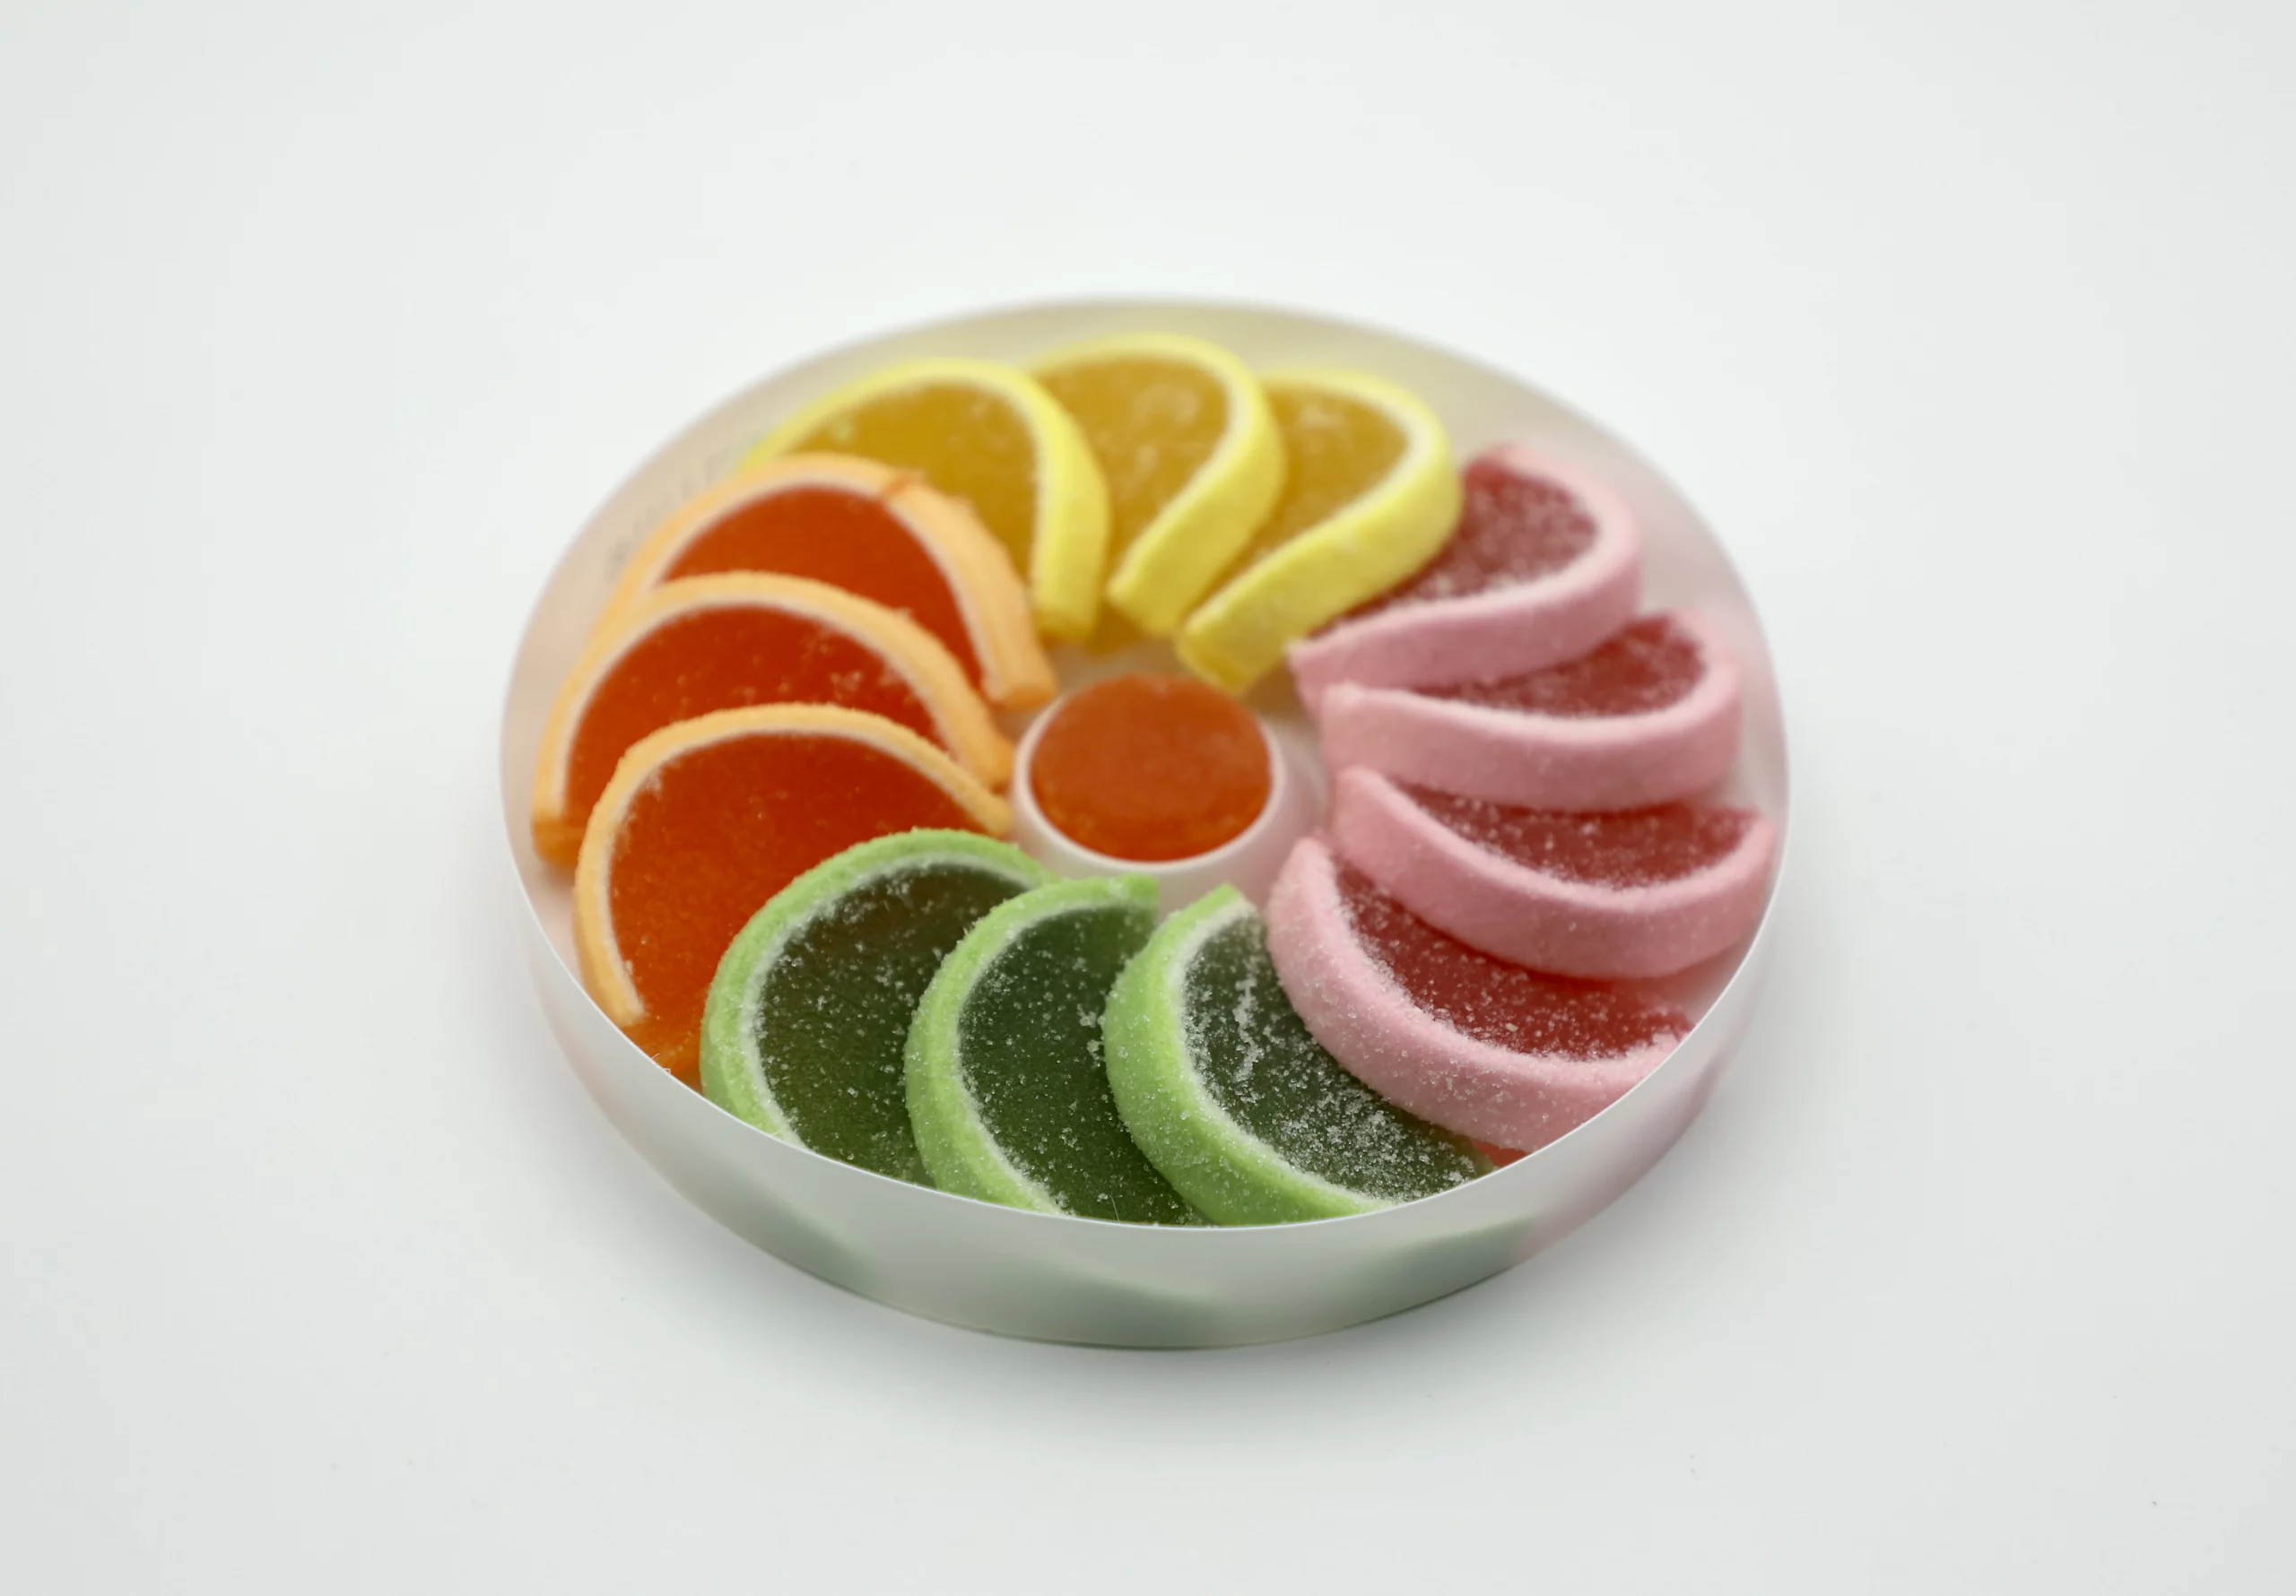 Sugar Fruit Slices - The Shop - Sweets for the UK